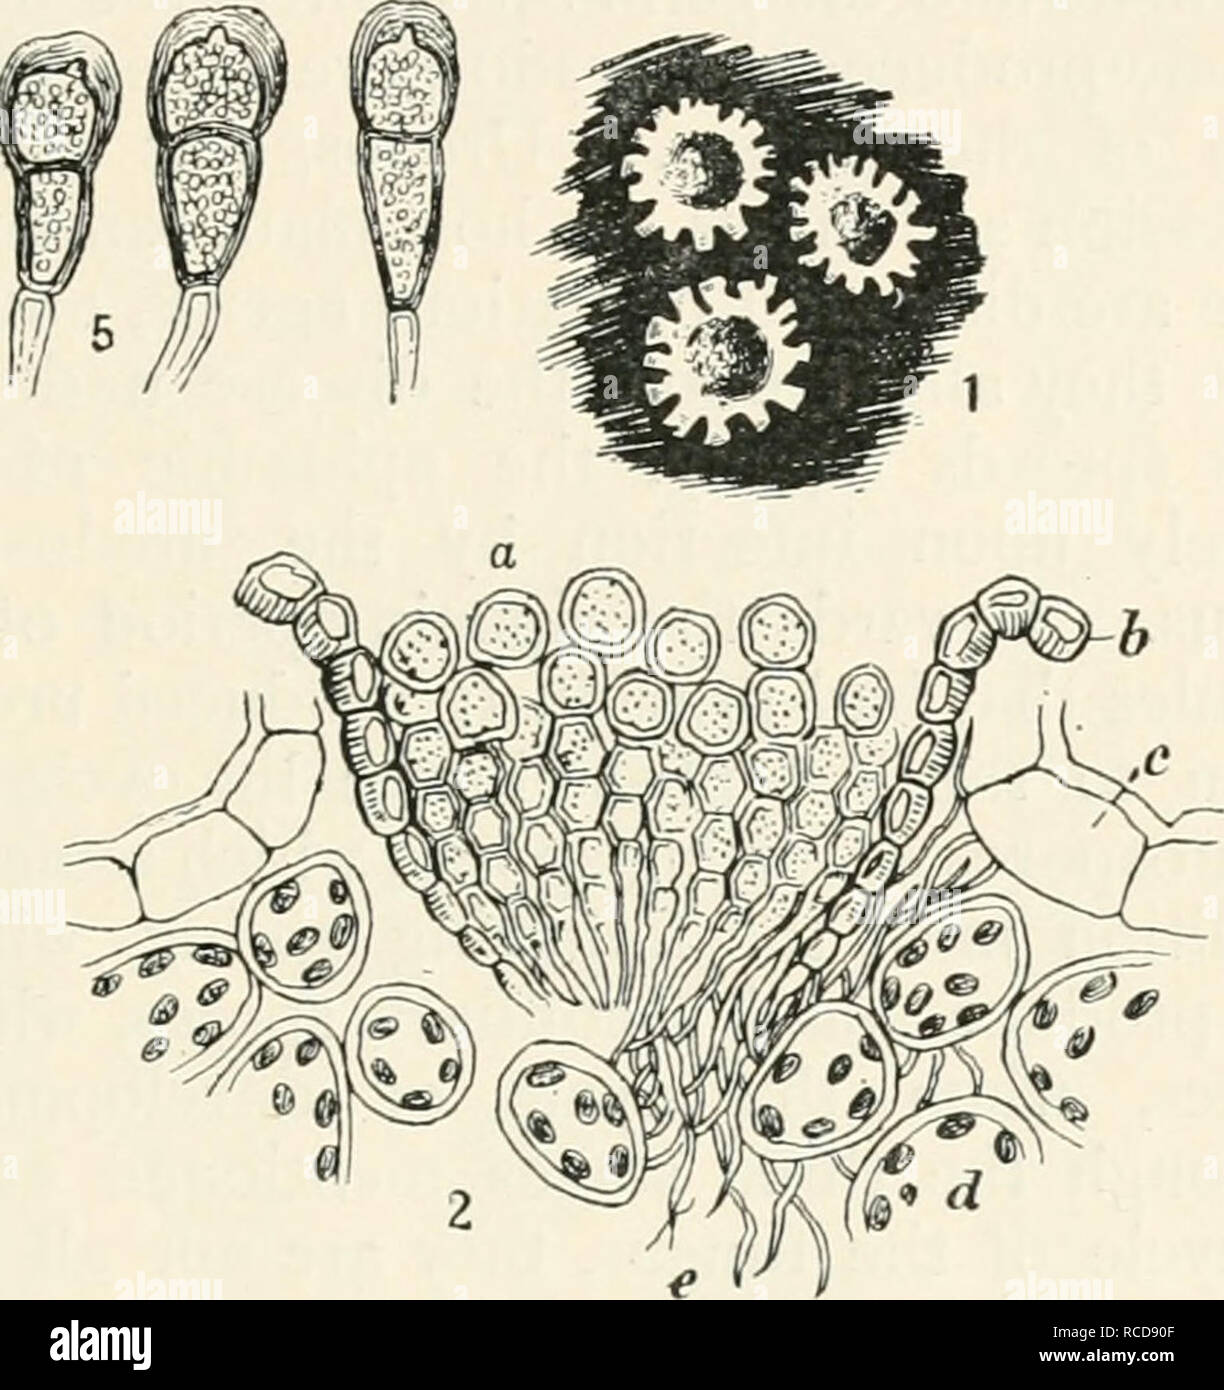 . Diseases of cultivated plants and trees. Plant diseases; Plants -- Wounds and injuries; Plants, Protection of; Trees -- Diseases and pests. Fig. 88.—Puccinia pringshcimiana. i, portion of gooseberry leaf with three aecidia or ' cluster-cups ' ; 2, section through a ' cluster-cup'; a, spores produced in chains; b, wall or peridium ; c, epidermis of host; rf, middle cells of leaf; e, mycelium of fungus ; 3, portion of sedge leaf bearing sori of teleutospores ; 4, portion of same ; 5, teleutospores. 6, uredo- spores. Fig. i nat. size, and remainder variously mag. thickened, roundish or truncate Stock Photo